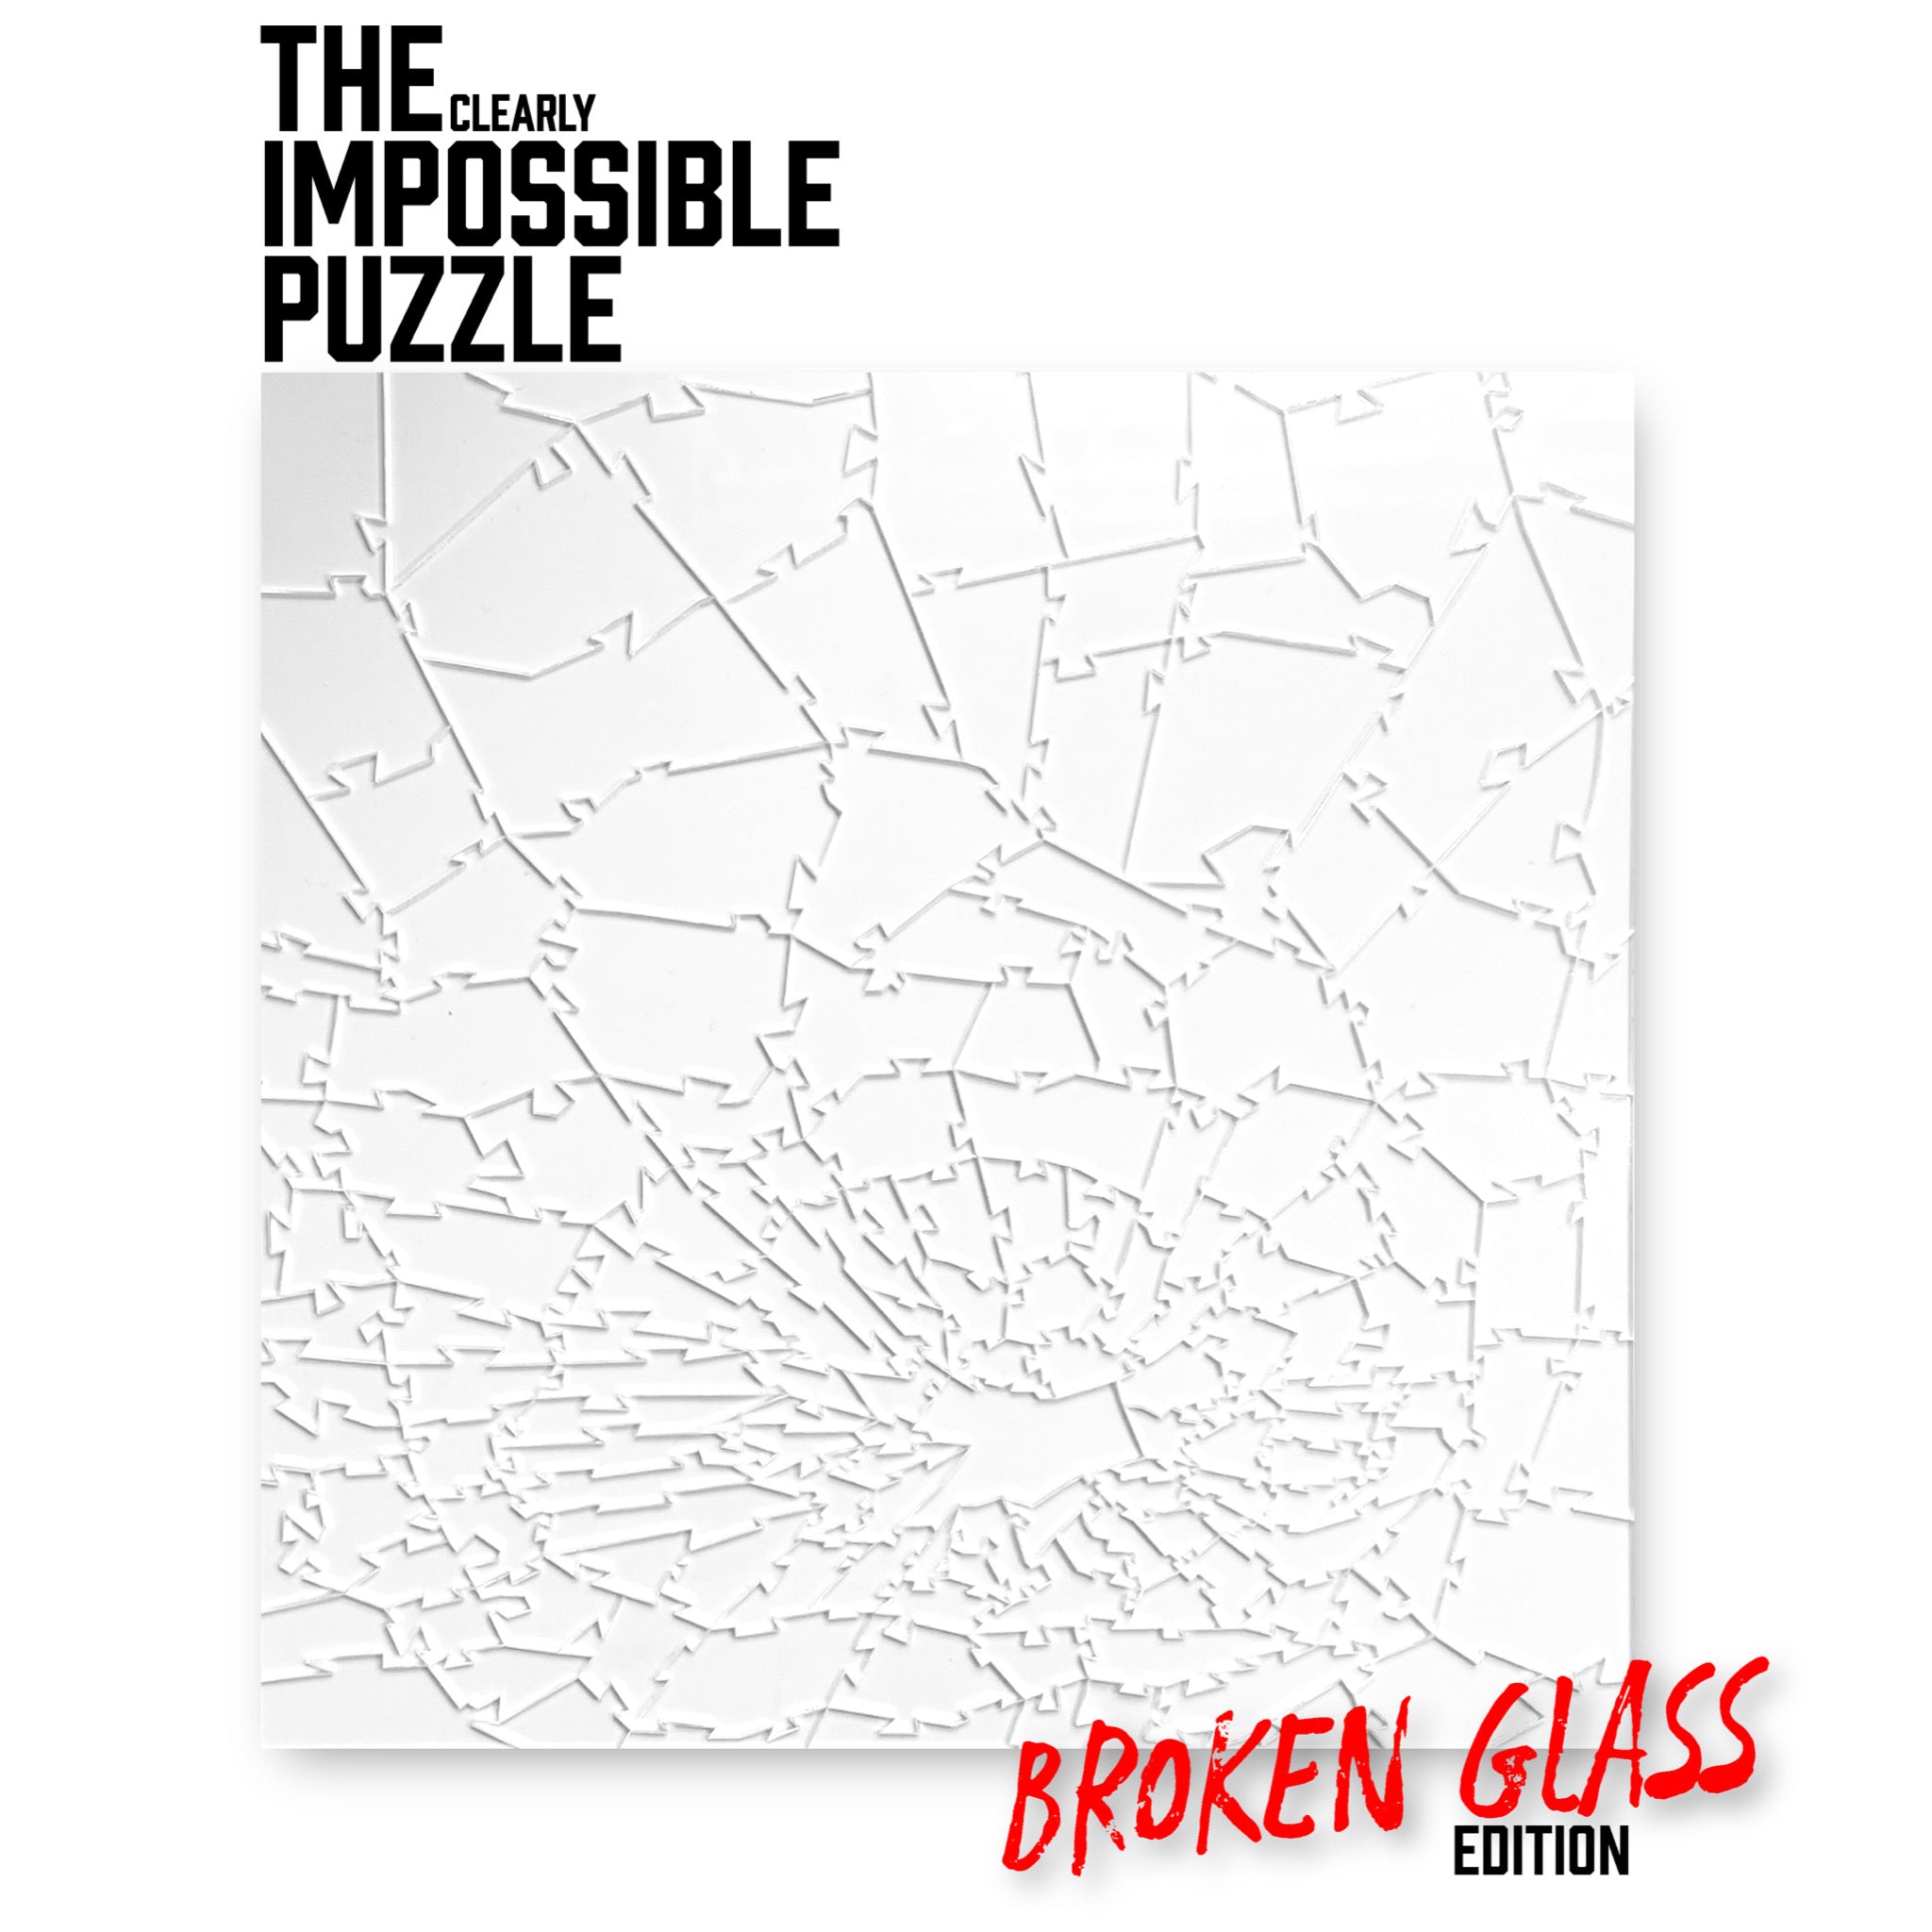 Broken Glass Edition – The Clearly Impossible Puzzle